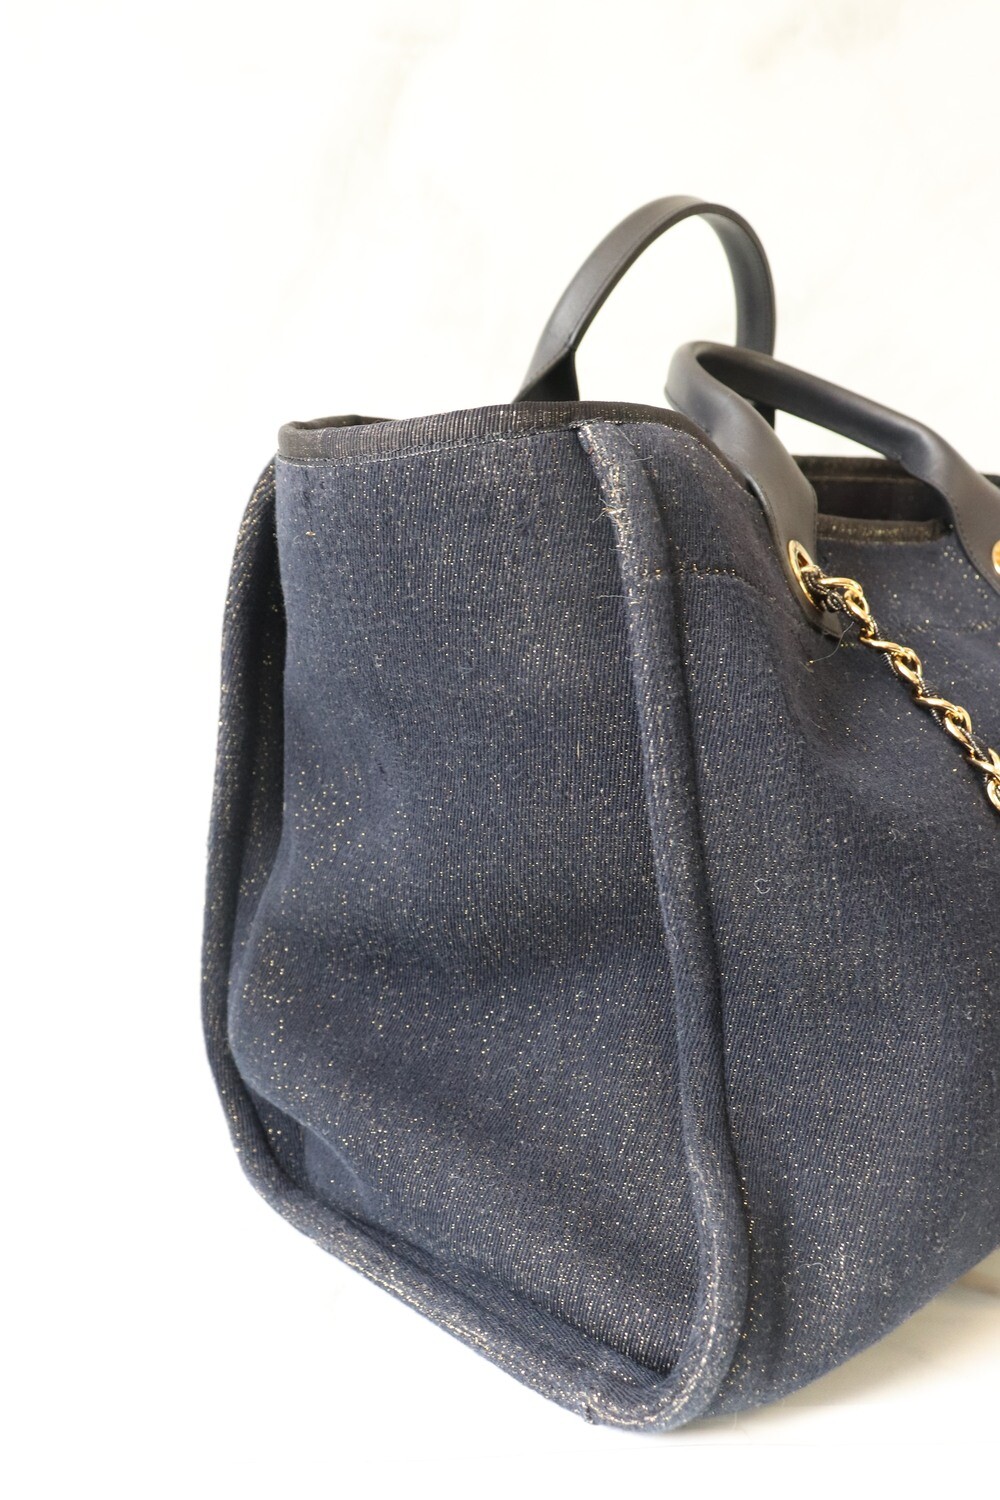 Chanel Deauville, Navy Tweed with Gold, Preowned - No Dustbag MA001